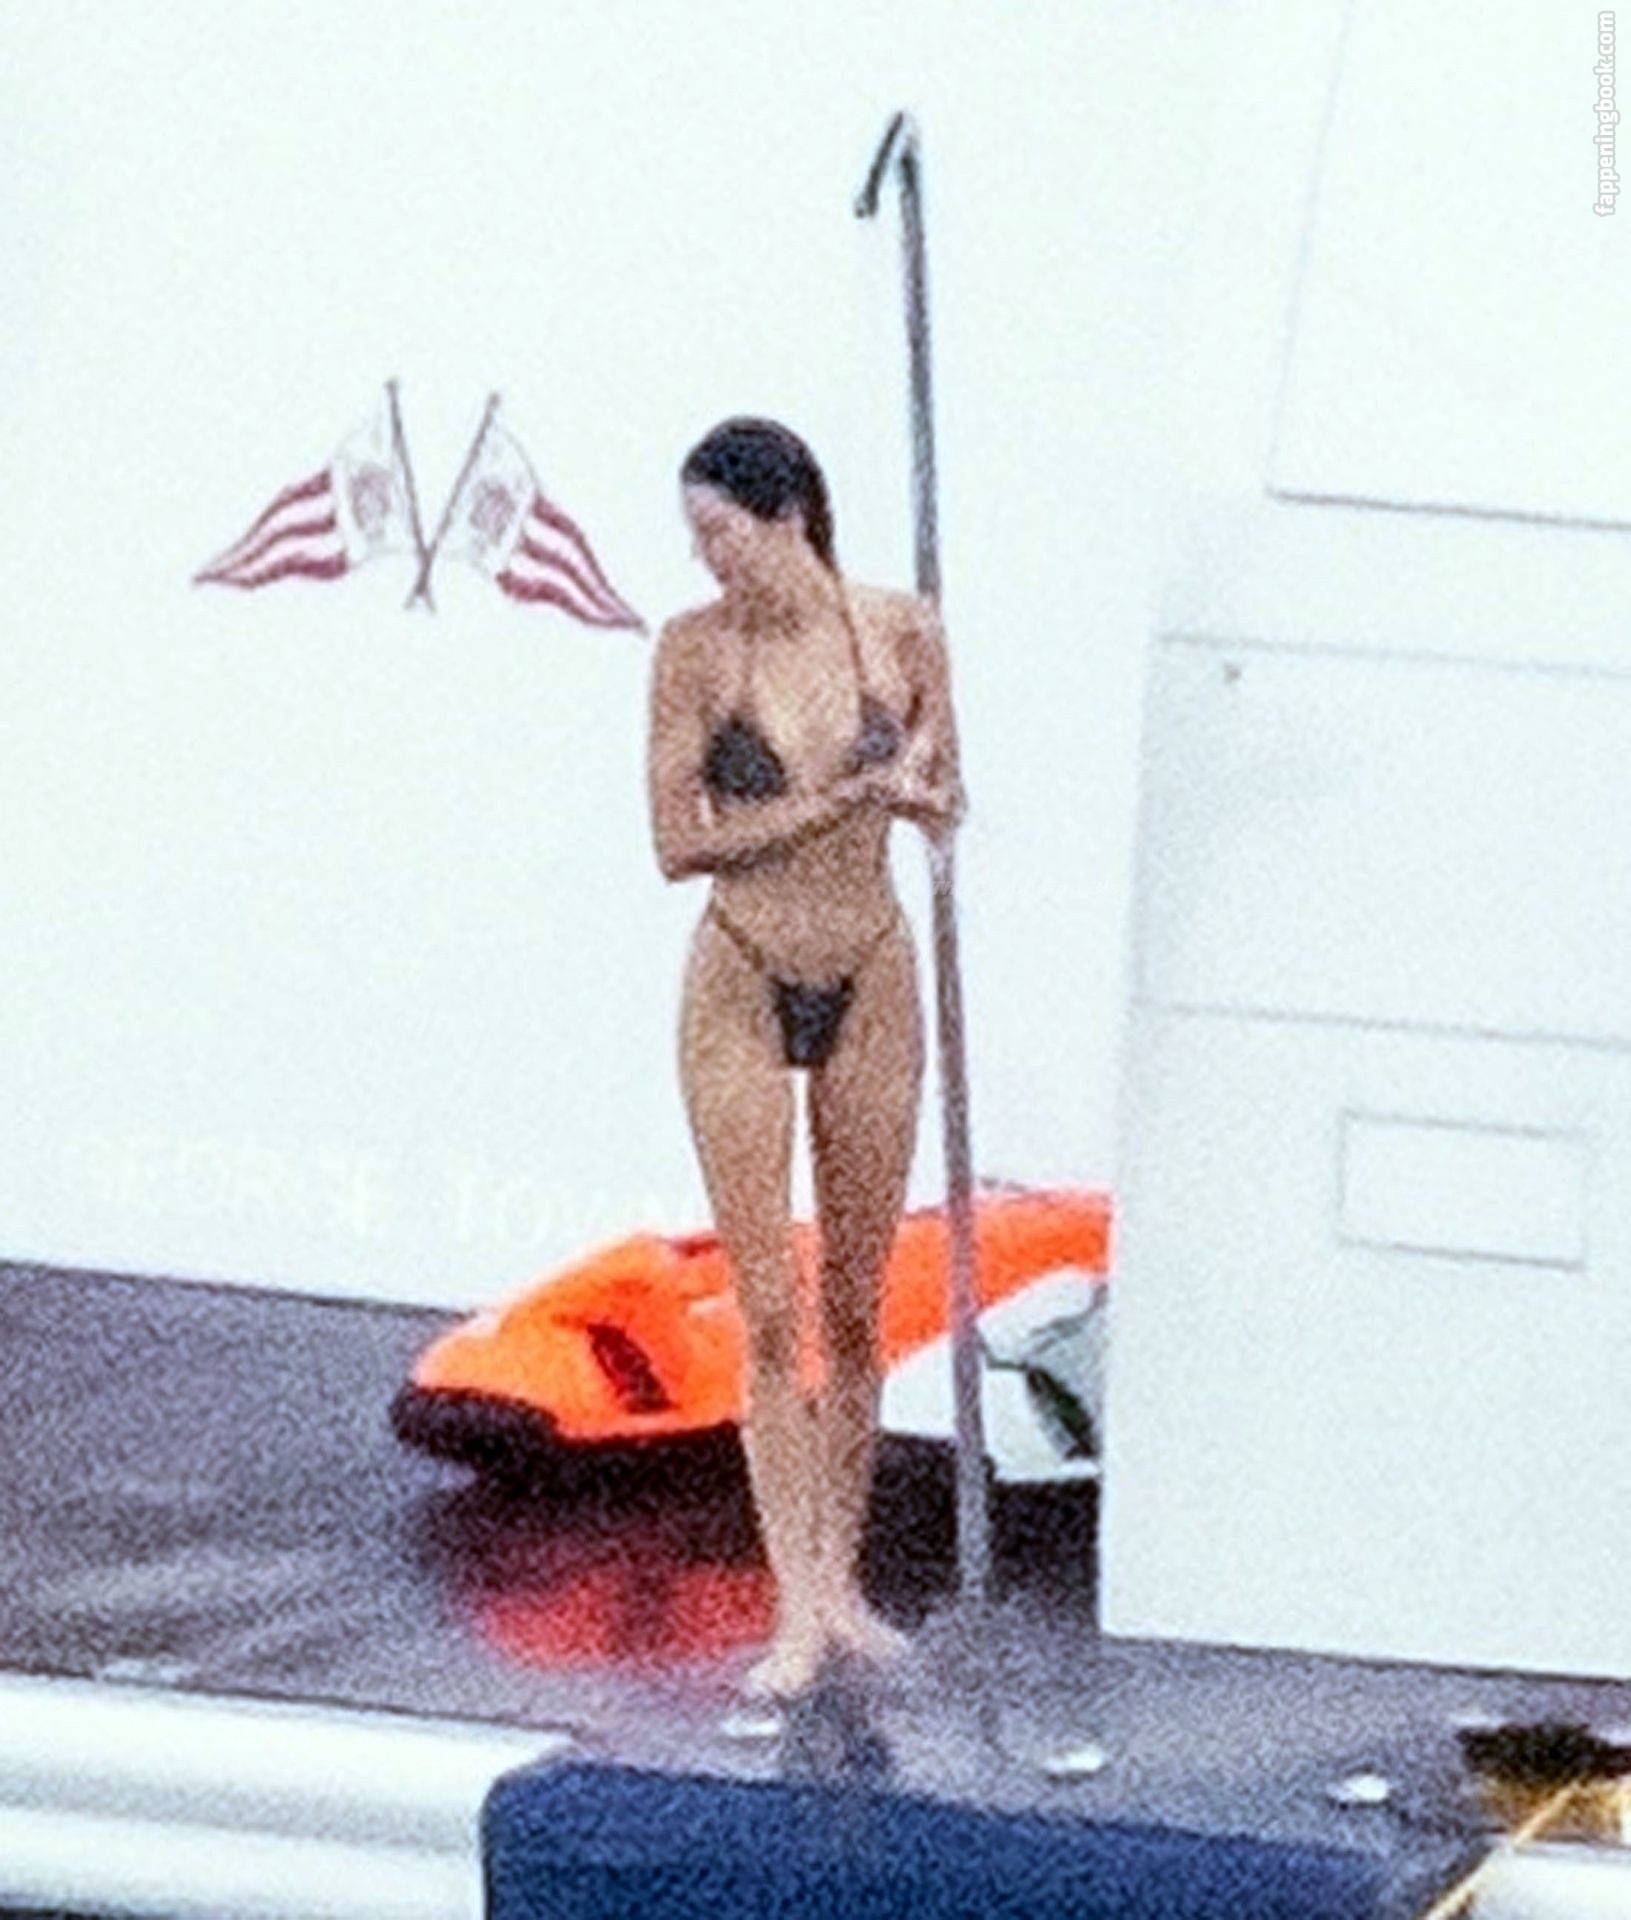 Kendall Jenner Nude